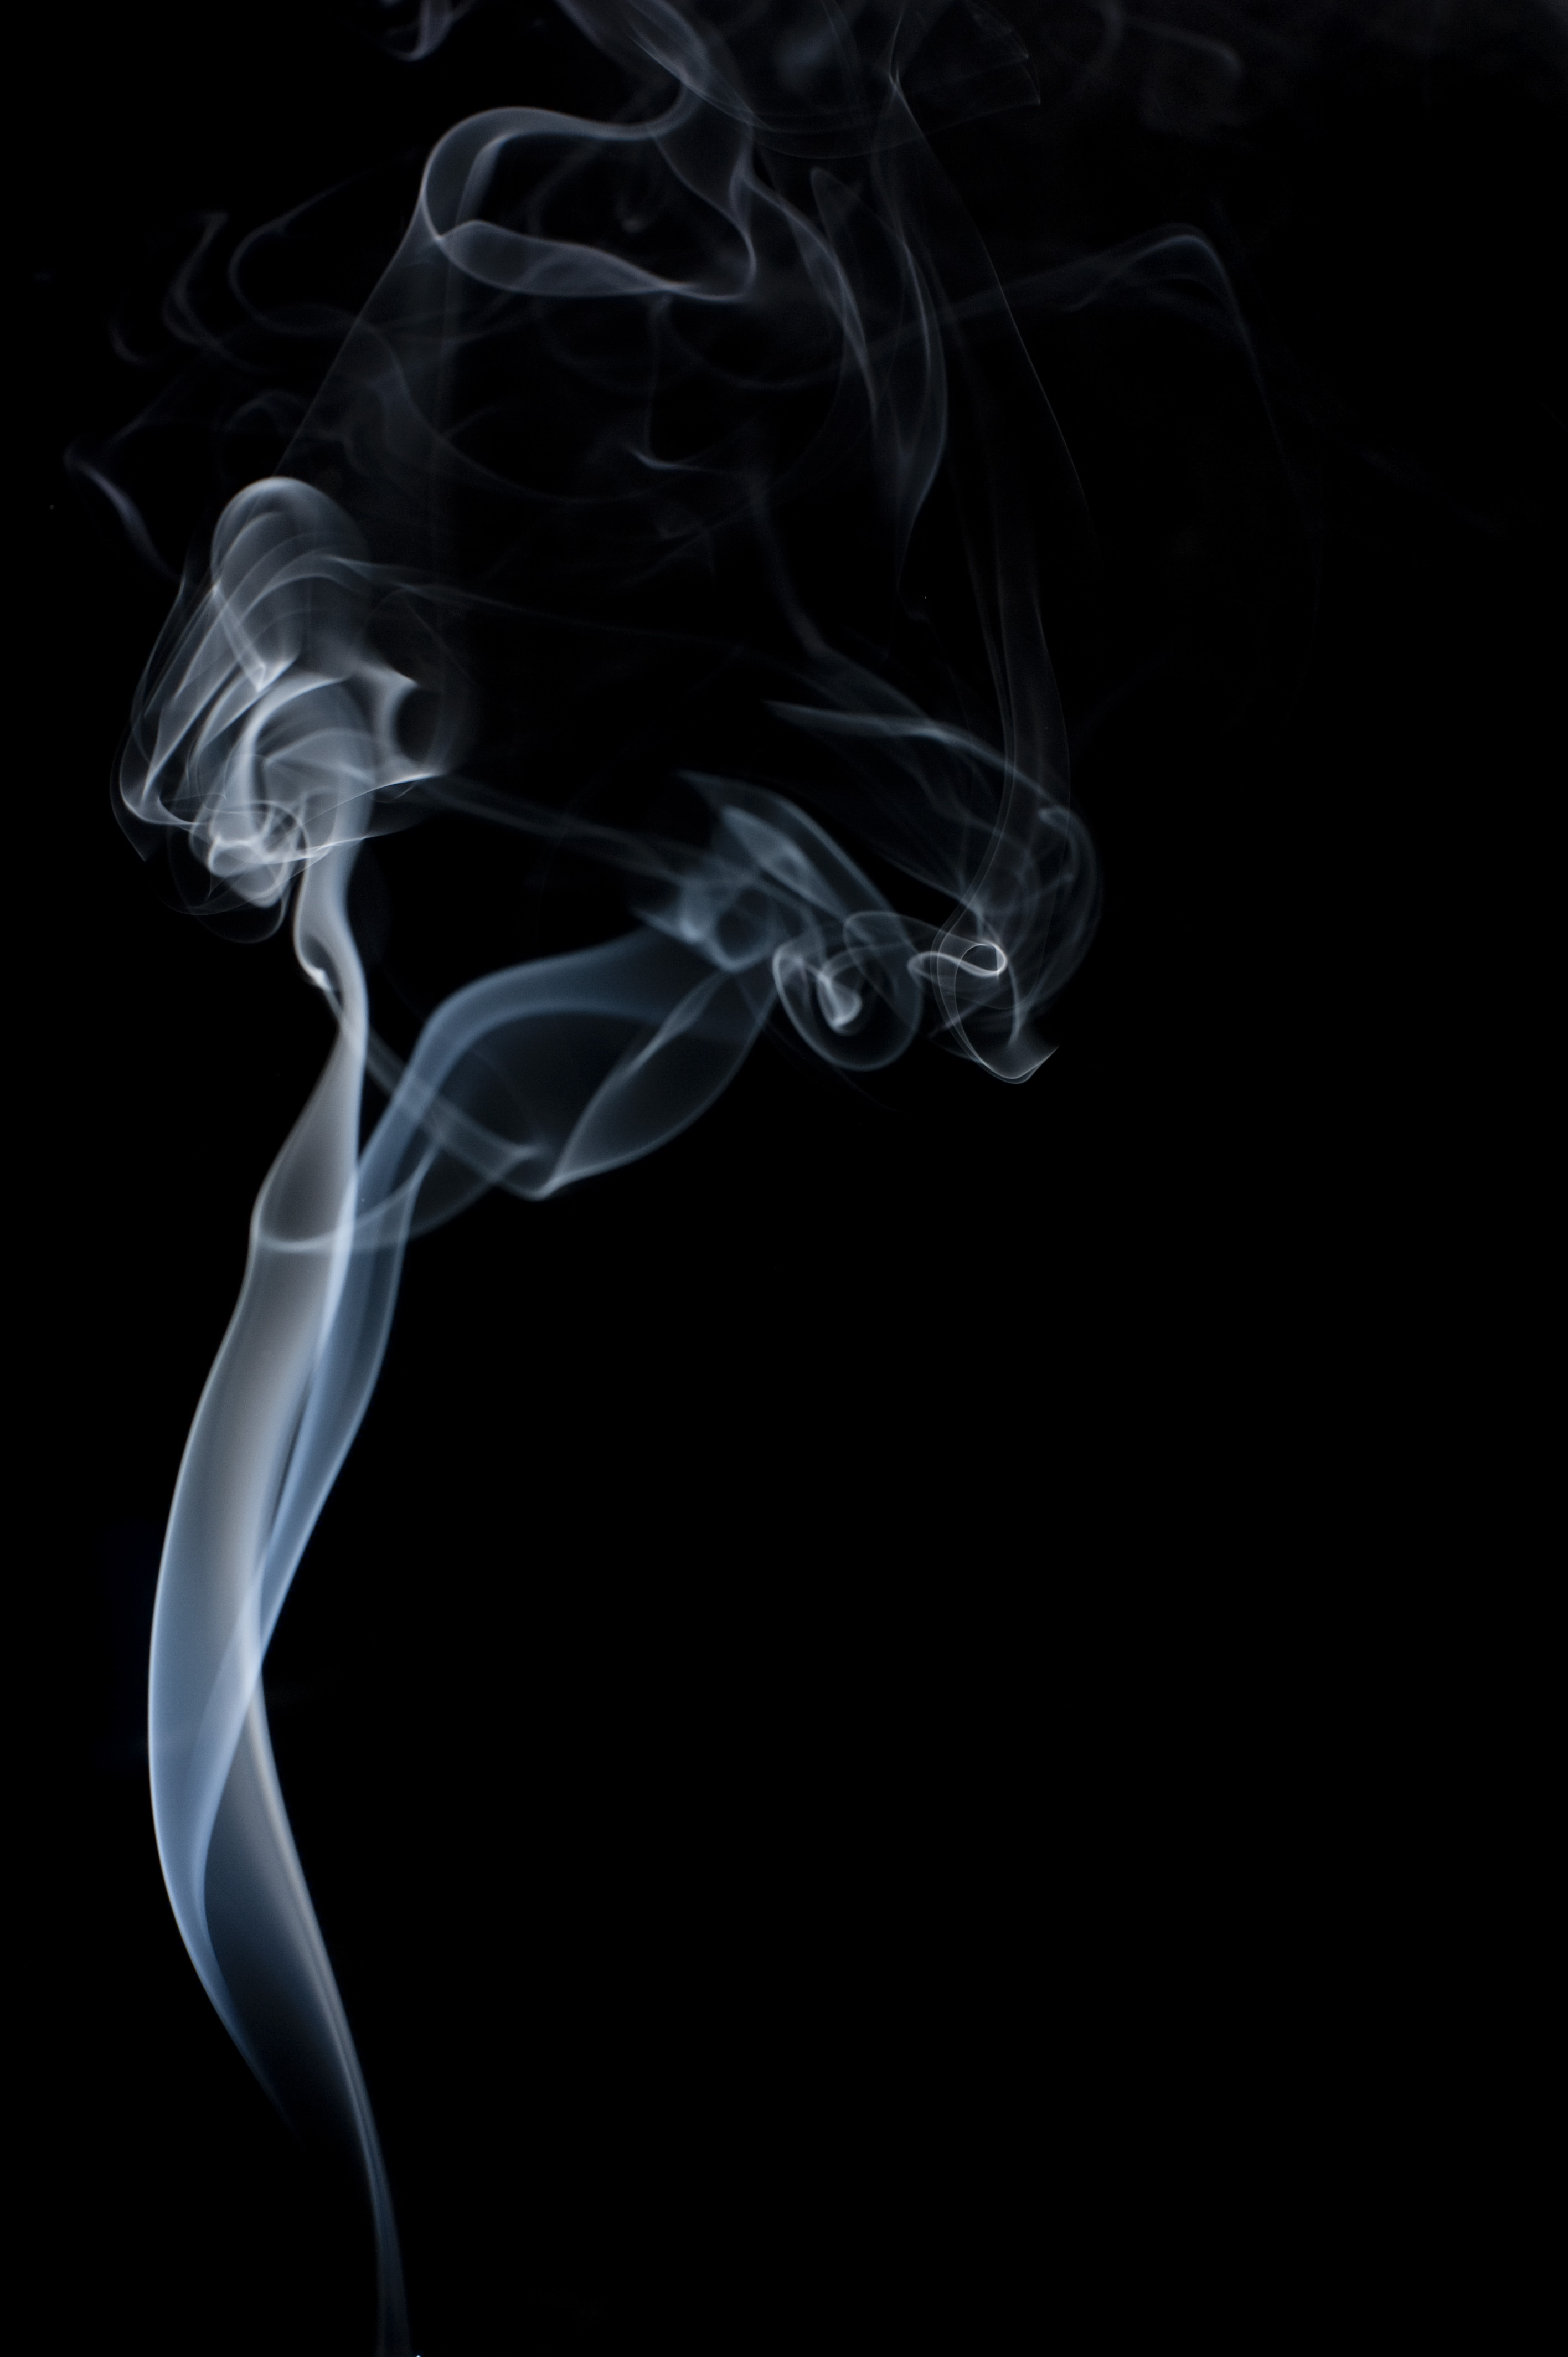 Smoke background Free backgrounds and textures Cr103.com